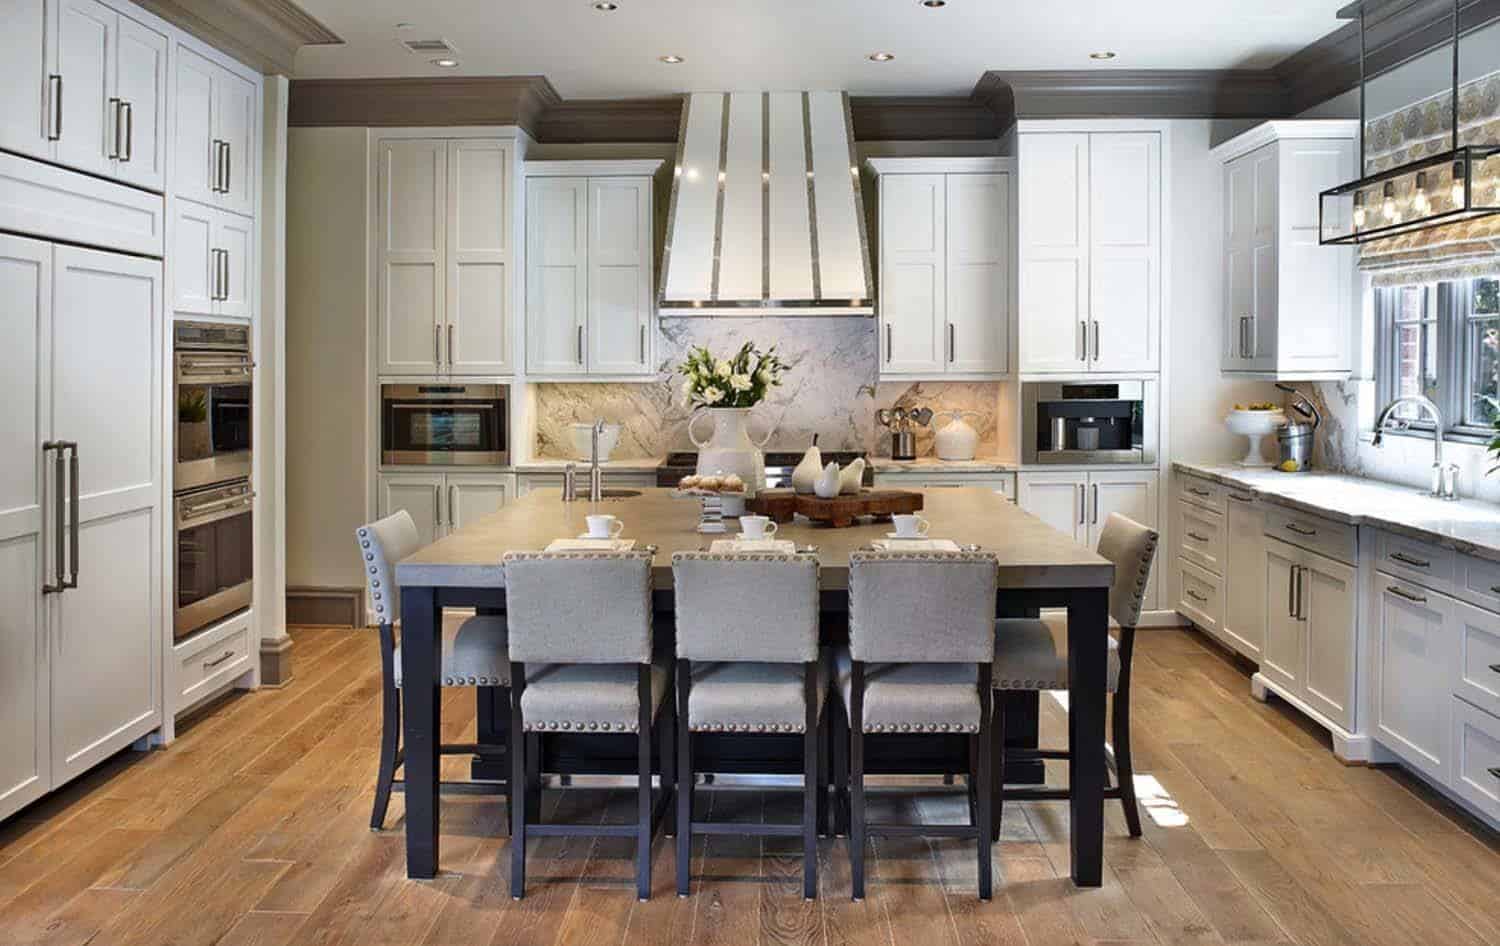 island kitchen seating table dimensions dining designs townhome chairs breakfast area house statement room modern light countertops wine remodel